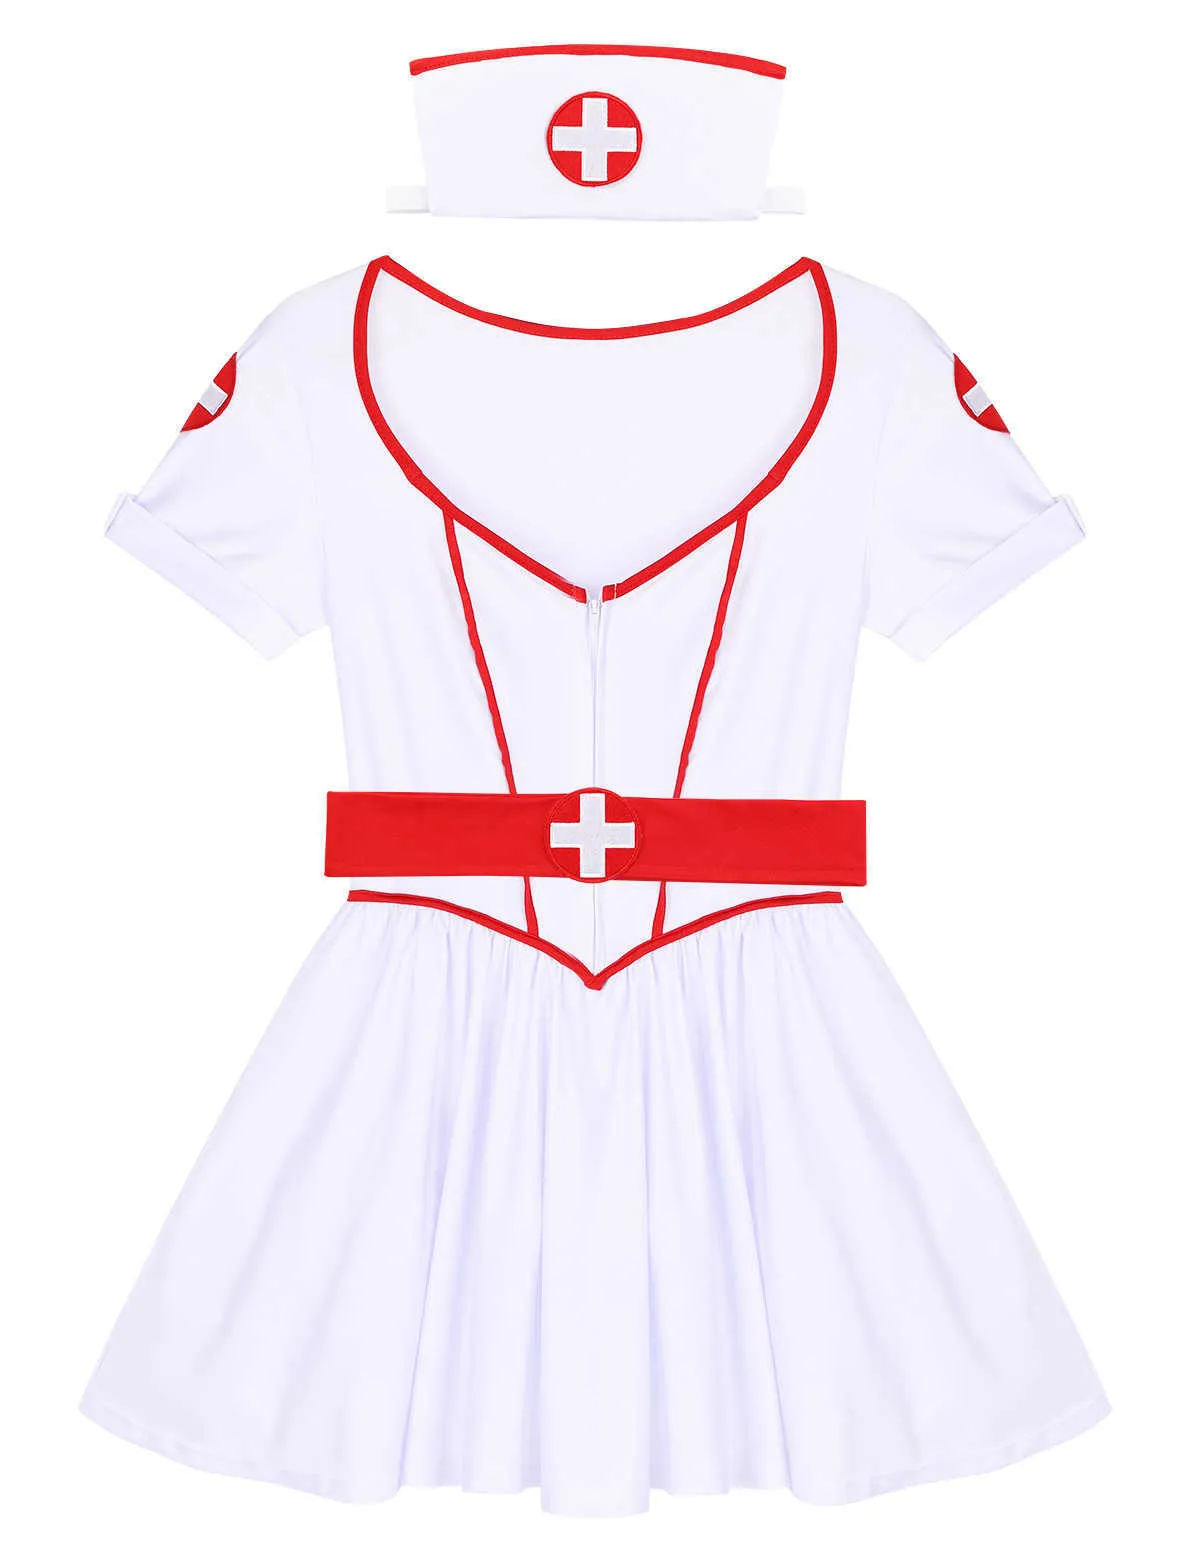 Women Adults Naughty Nurse Cosplay Costume Halloween Party Outfit Sweetheart Neckline Tutu Dress with Headband and Belt G09252937655